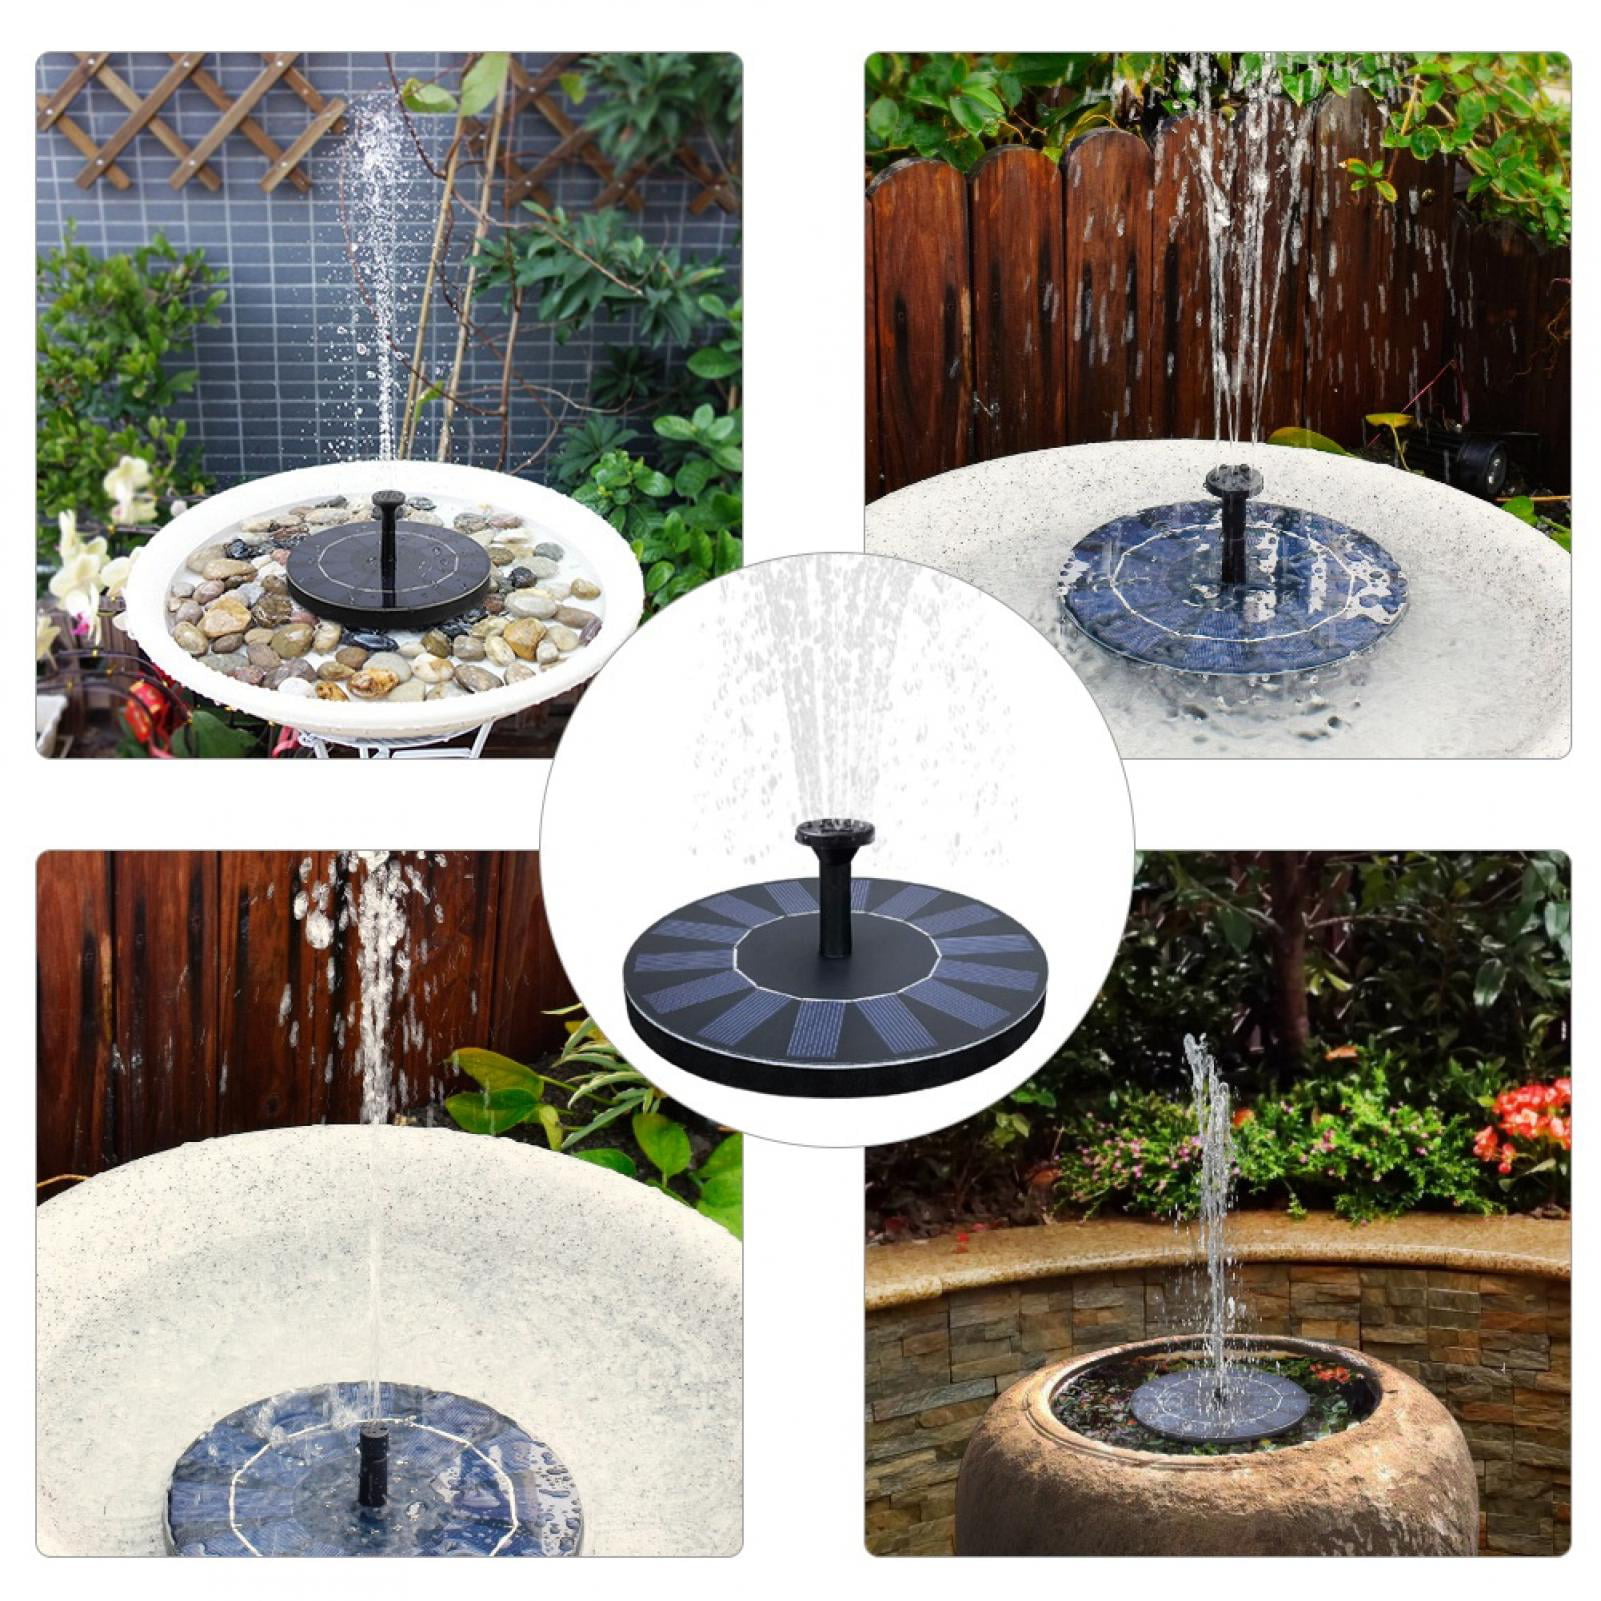 Details about   LED Solar Powered Floating Bird Bath Water Fountain Pond Pool Garden Outdoor US 